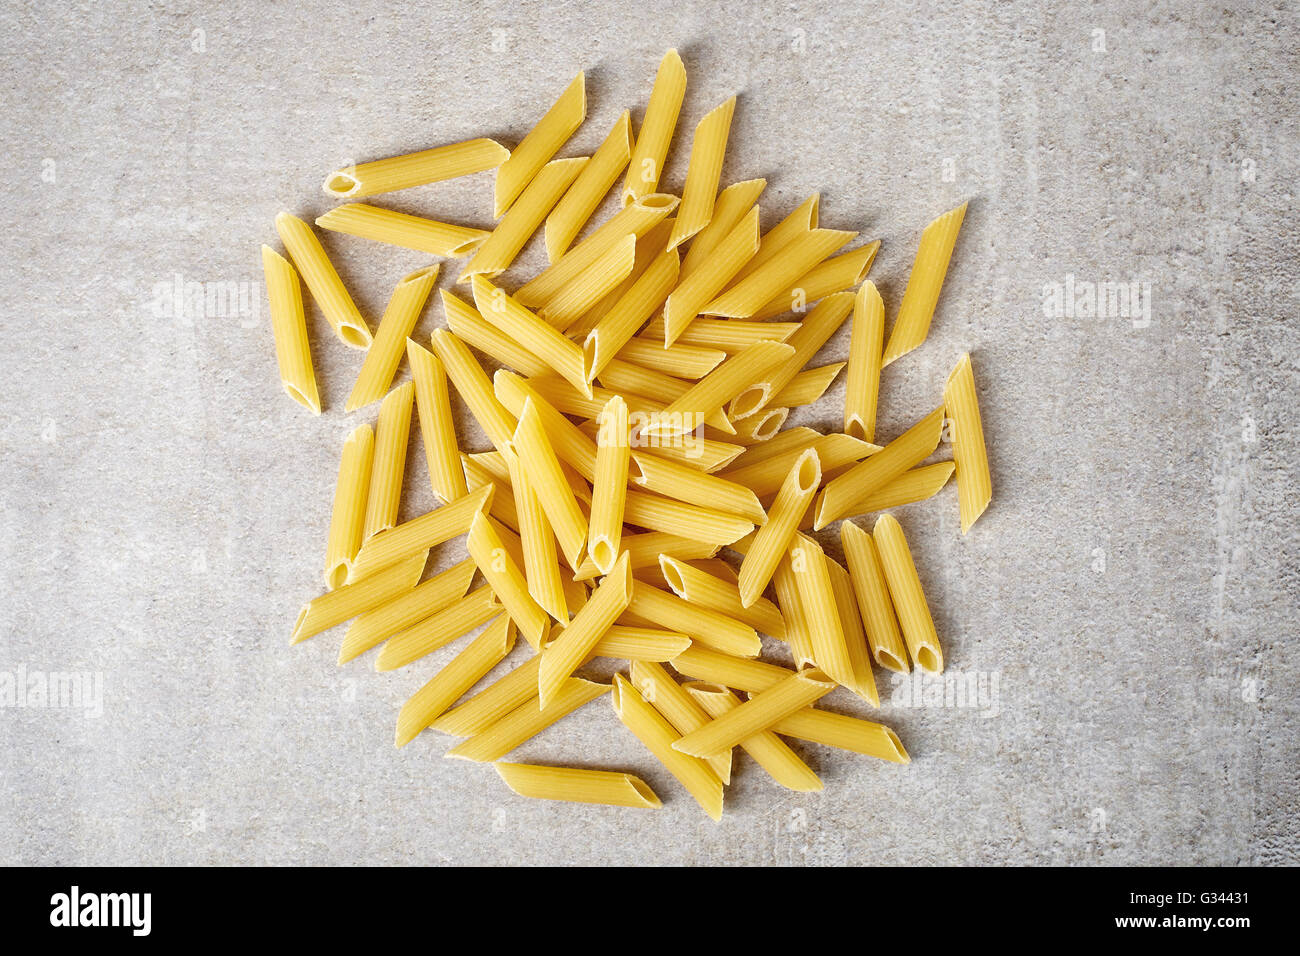 Penne pasta on stone table, top view Stock Photo